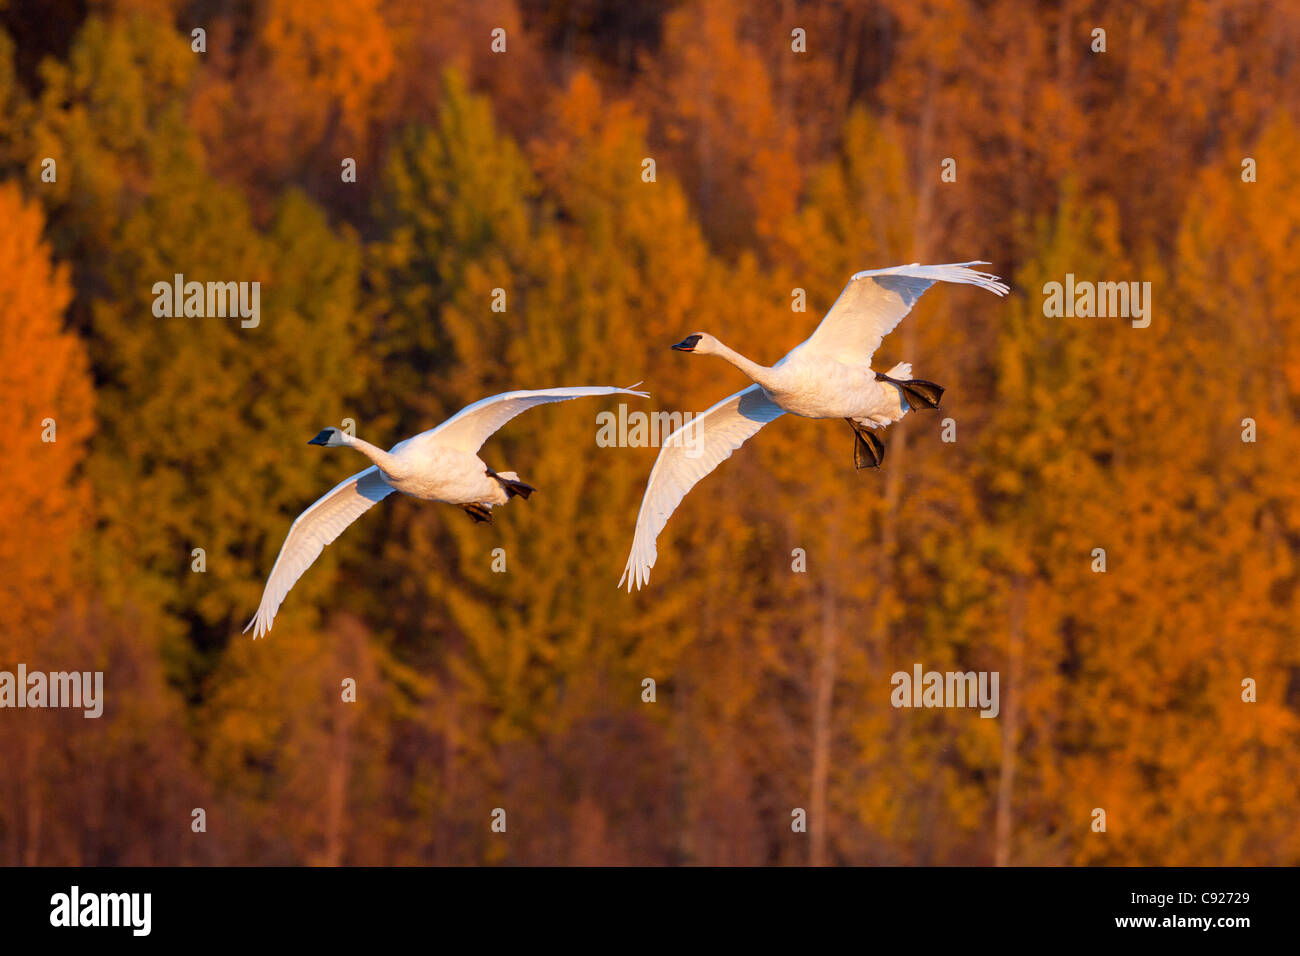 A pair of Trumpeter Swans fly in front of Autumn colored trees at Potter Marsh, Anchorage, Southcentral Alaska, Autumn Stock Photo